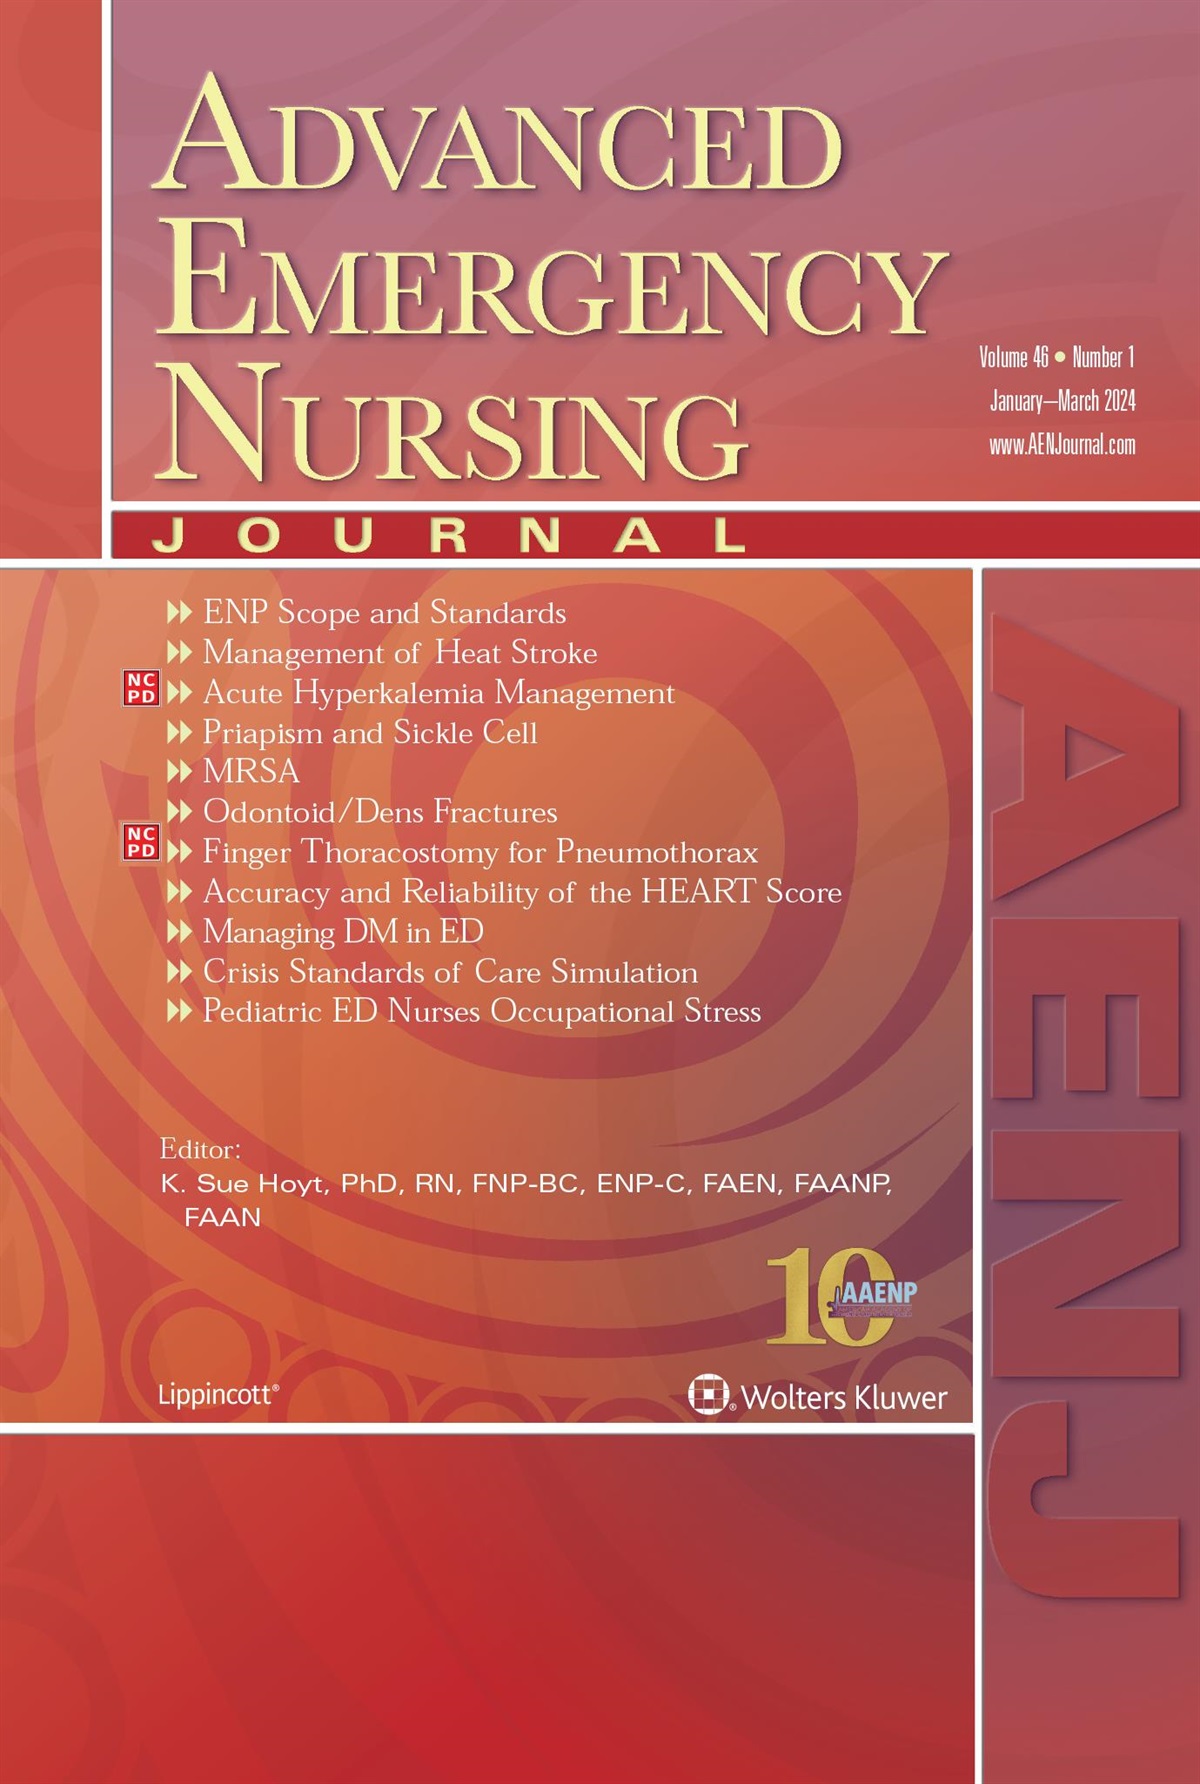 Guest Editorial: Emergency Nurse Practitioner Scope and Standards of Practice